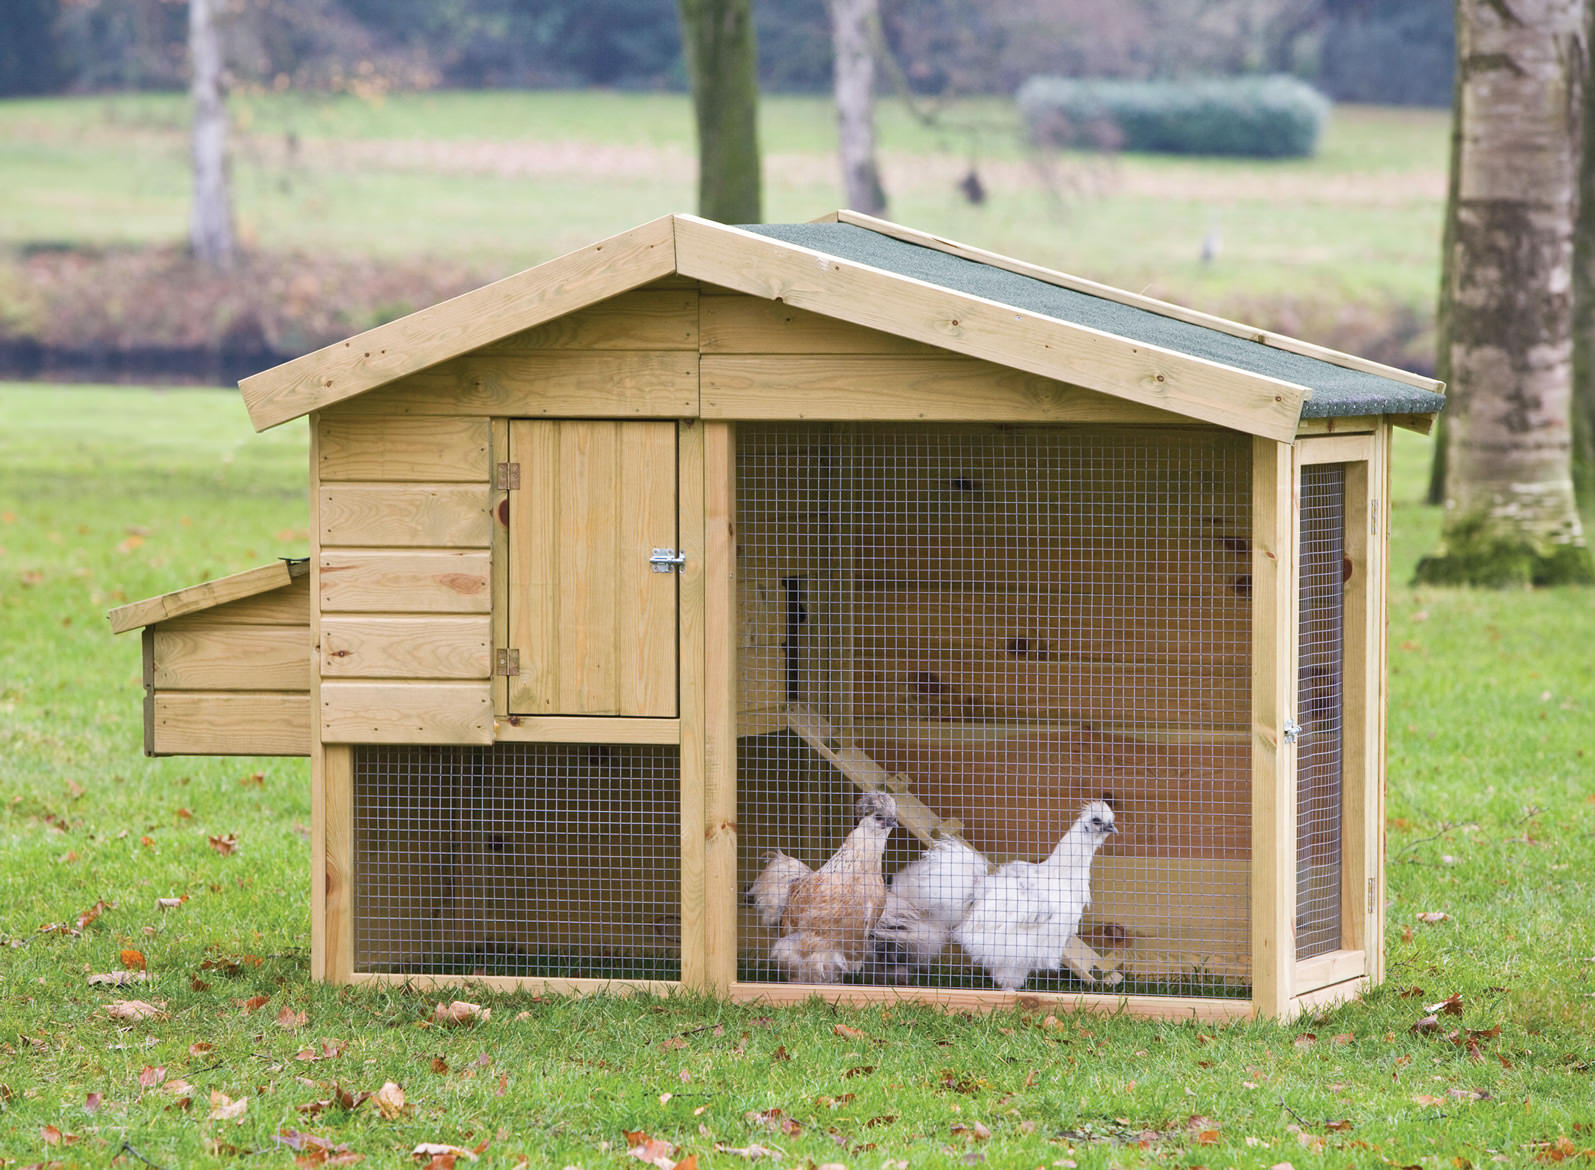 How To Build A Chicken Coop: Chicken Coops Designs - How To BuilD Your Own Chicken Coop Chicken Coop Designs For 10 Chickens